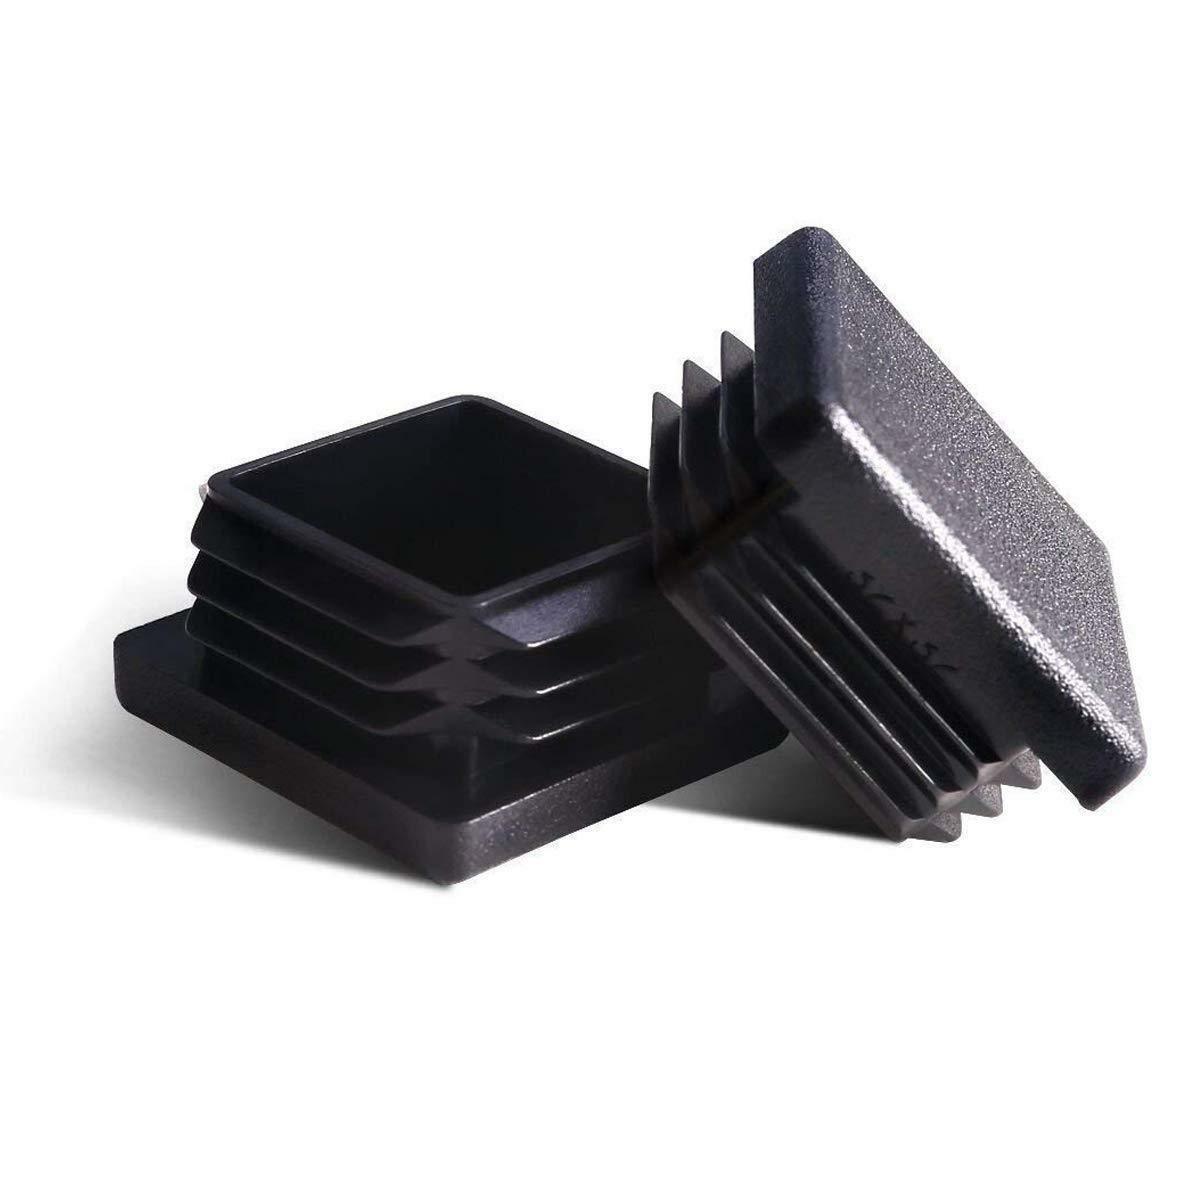 Primary image for 8 Plastic 1'' O.D. x 7/8'' I.D. Square Glide Tips